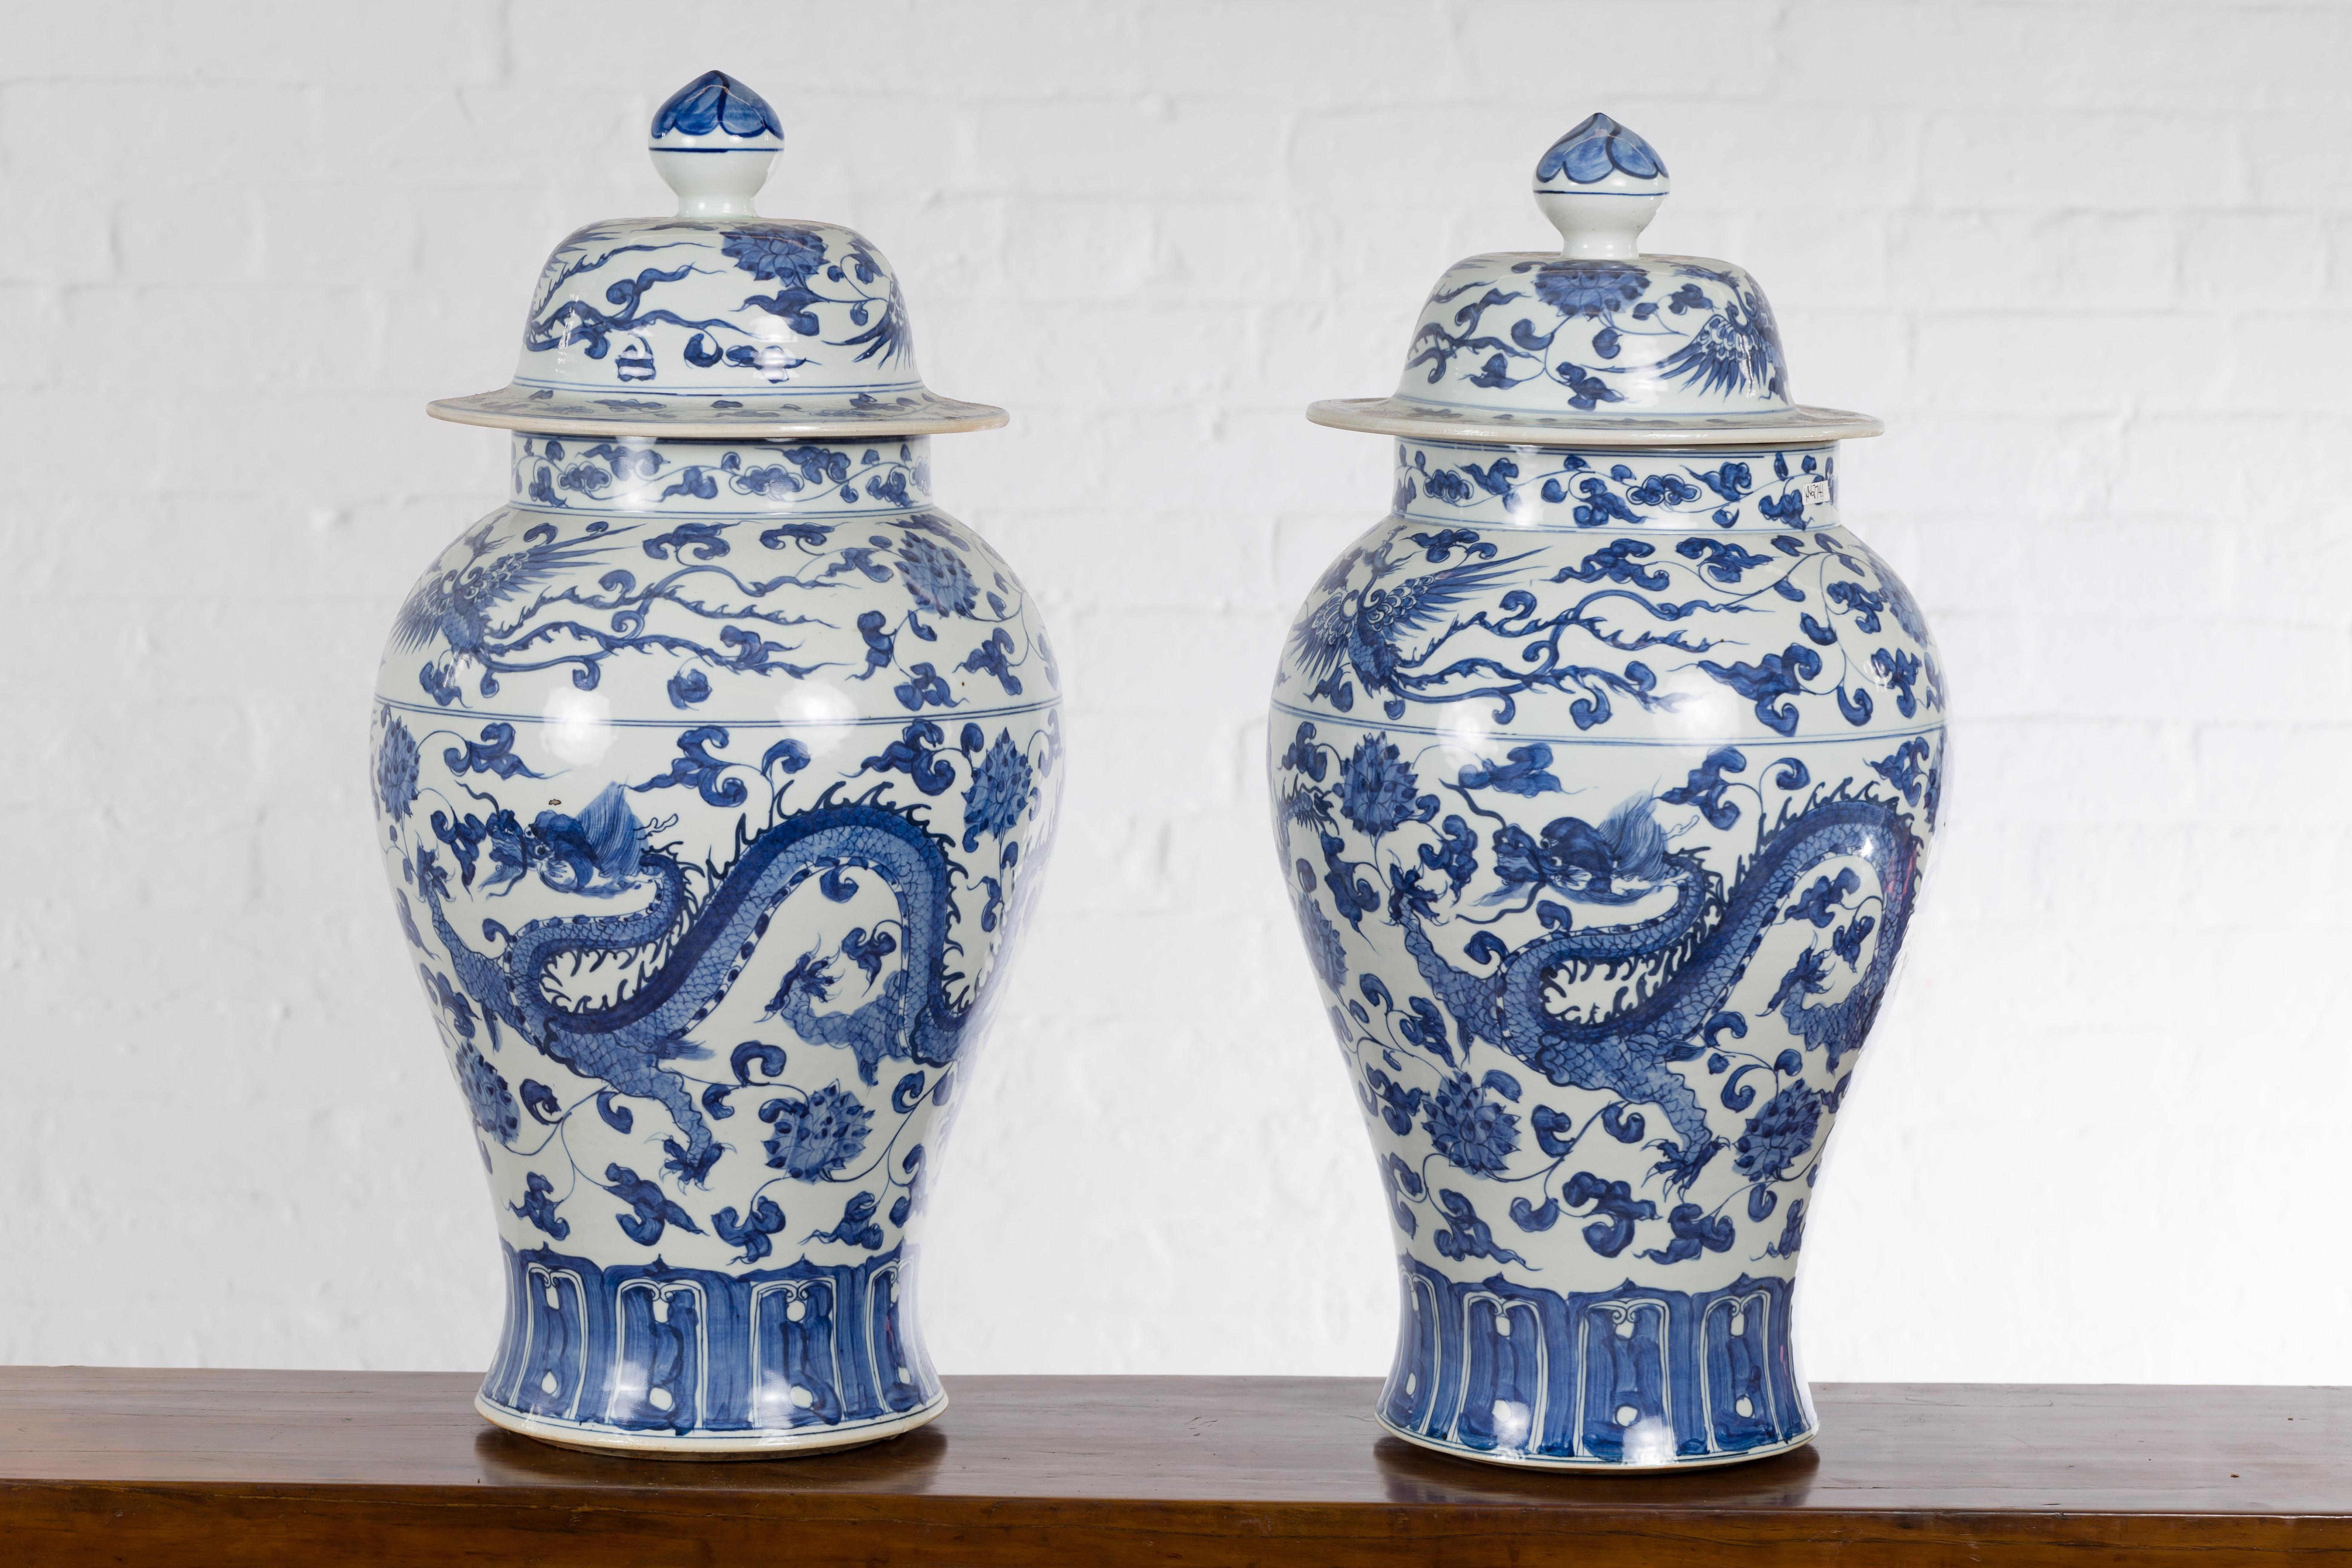 Pair of Vintage Chinese Blue and white Porcelain Lidded Jars with Dragon Motifs 14